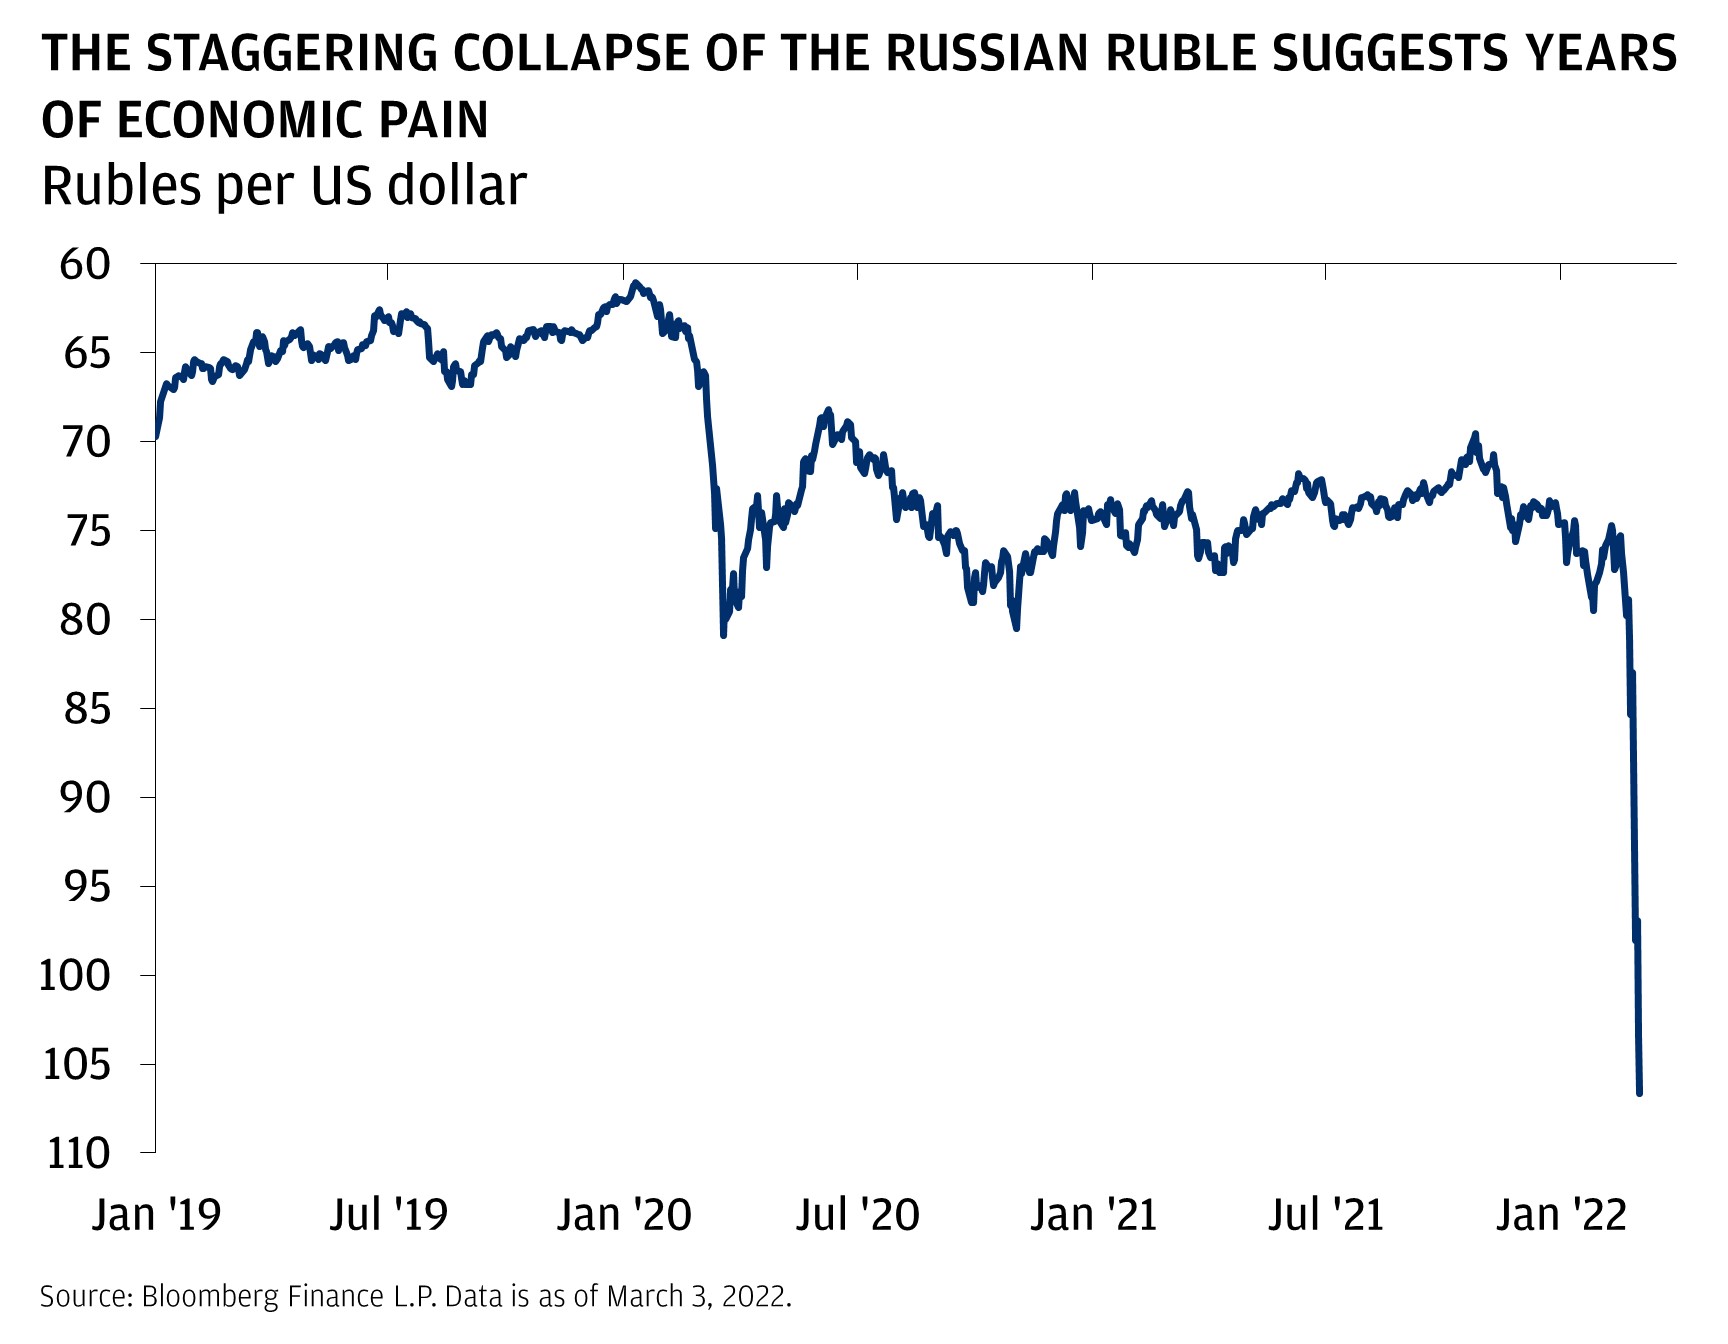 This chart shows the value of the ruble currency per U.S. dollar from December 31, 2018, until March 3, 2022. THE STAGGERING COLLAPSE OF THE RUSSIAN RUBLE SUGGESTS YEARS OF ECONOMIC PAIN